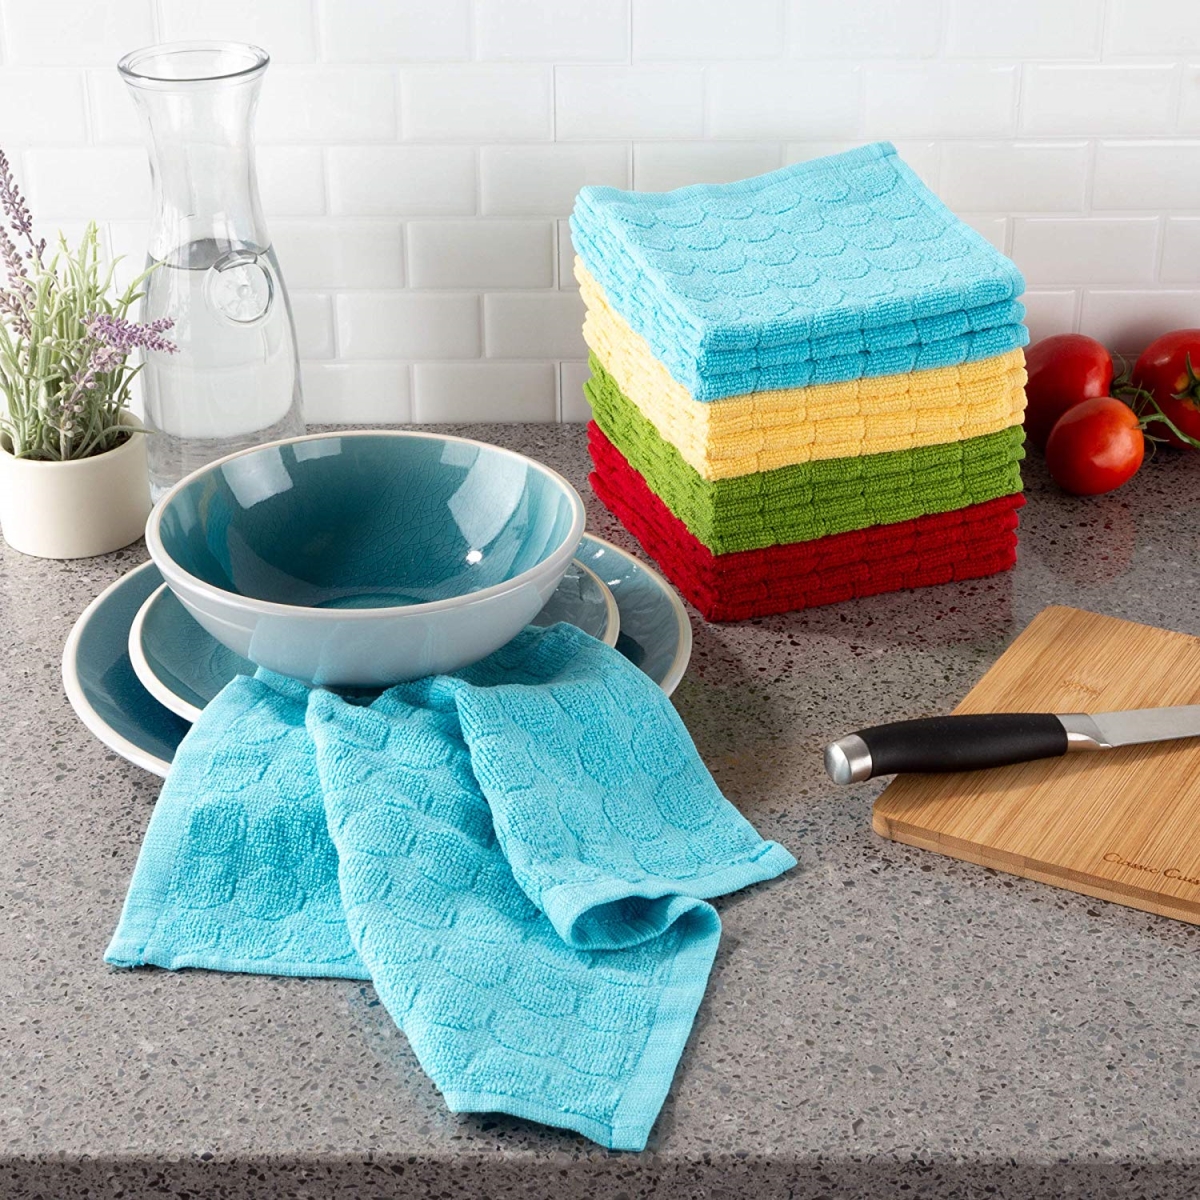 69a-39307 12.5 X 12.5 In. Home Kitchen Dish Cloth, Multi-color - Set Of 16